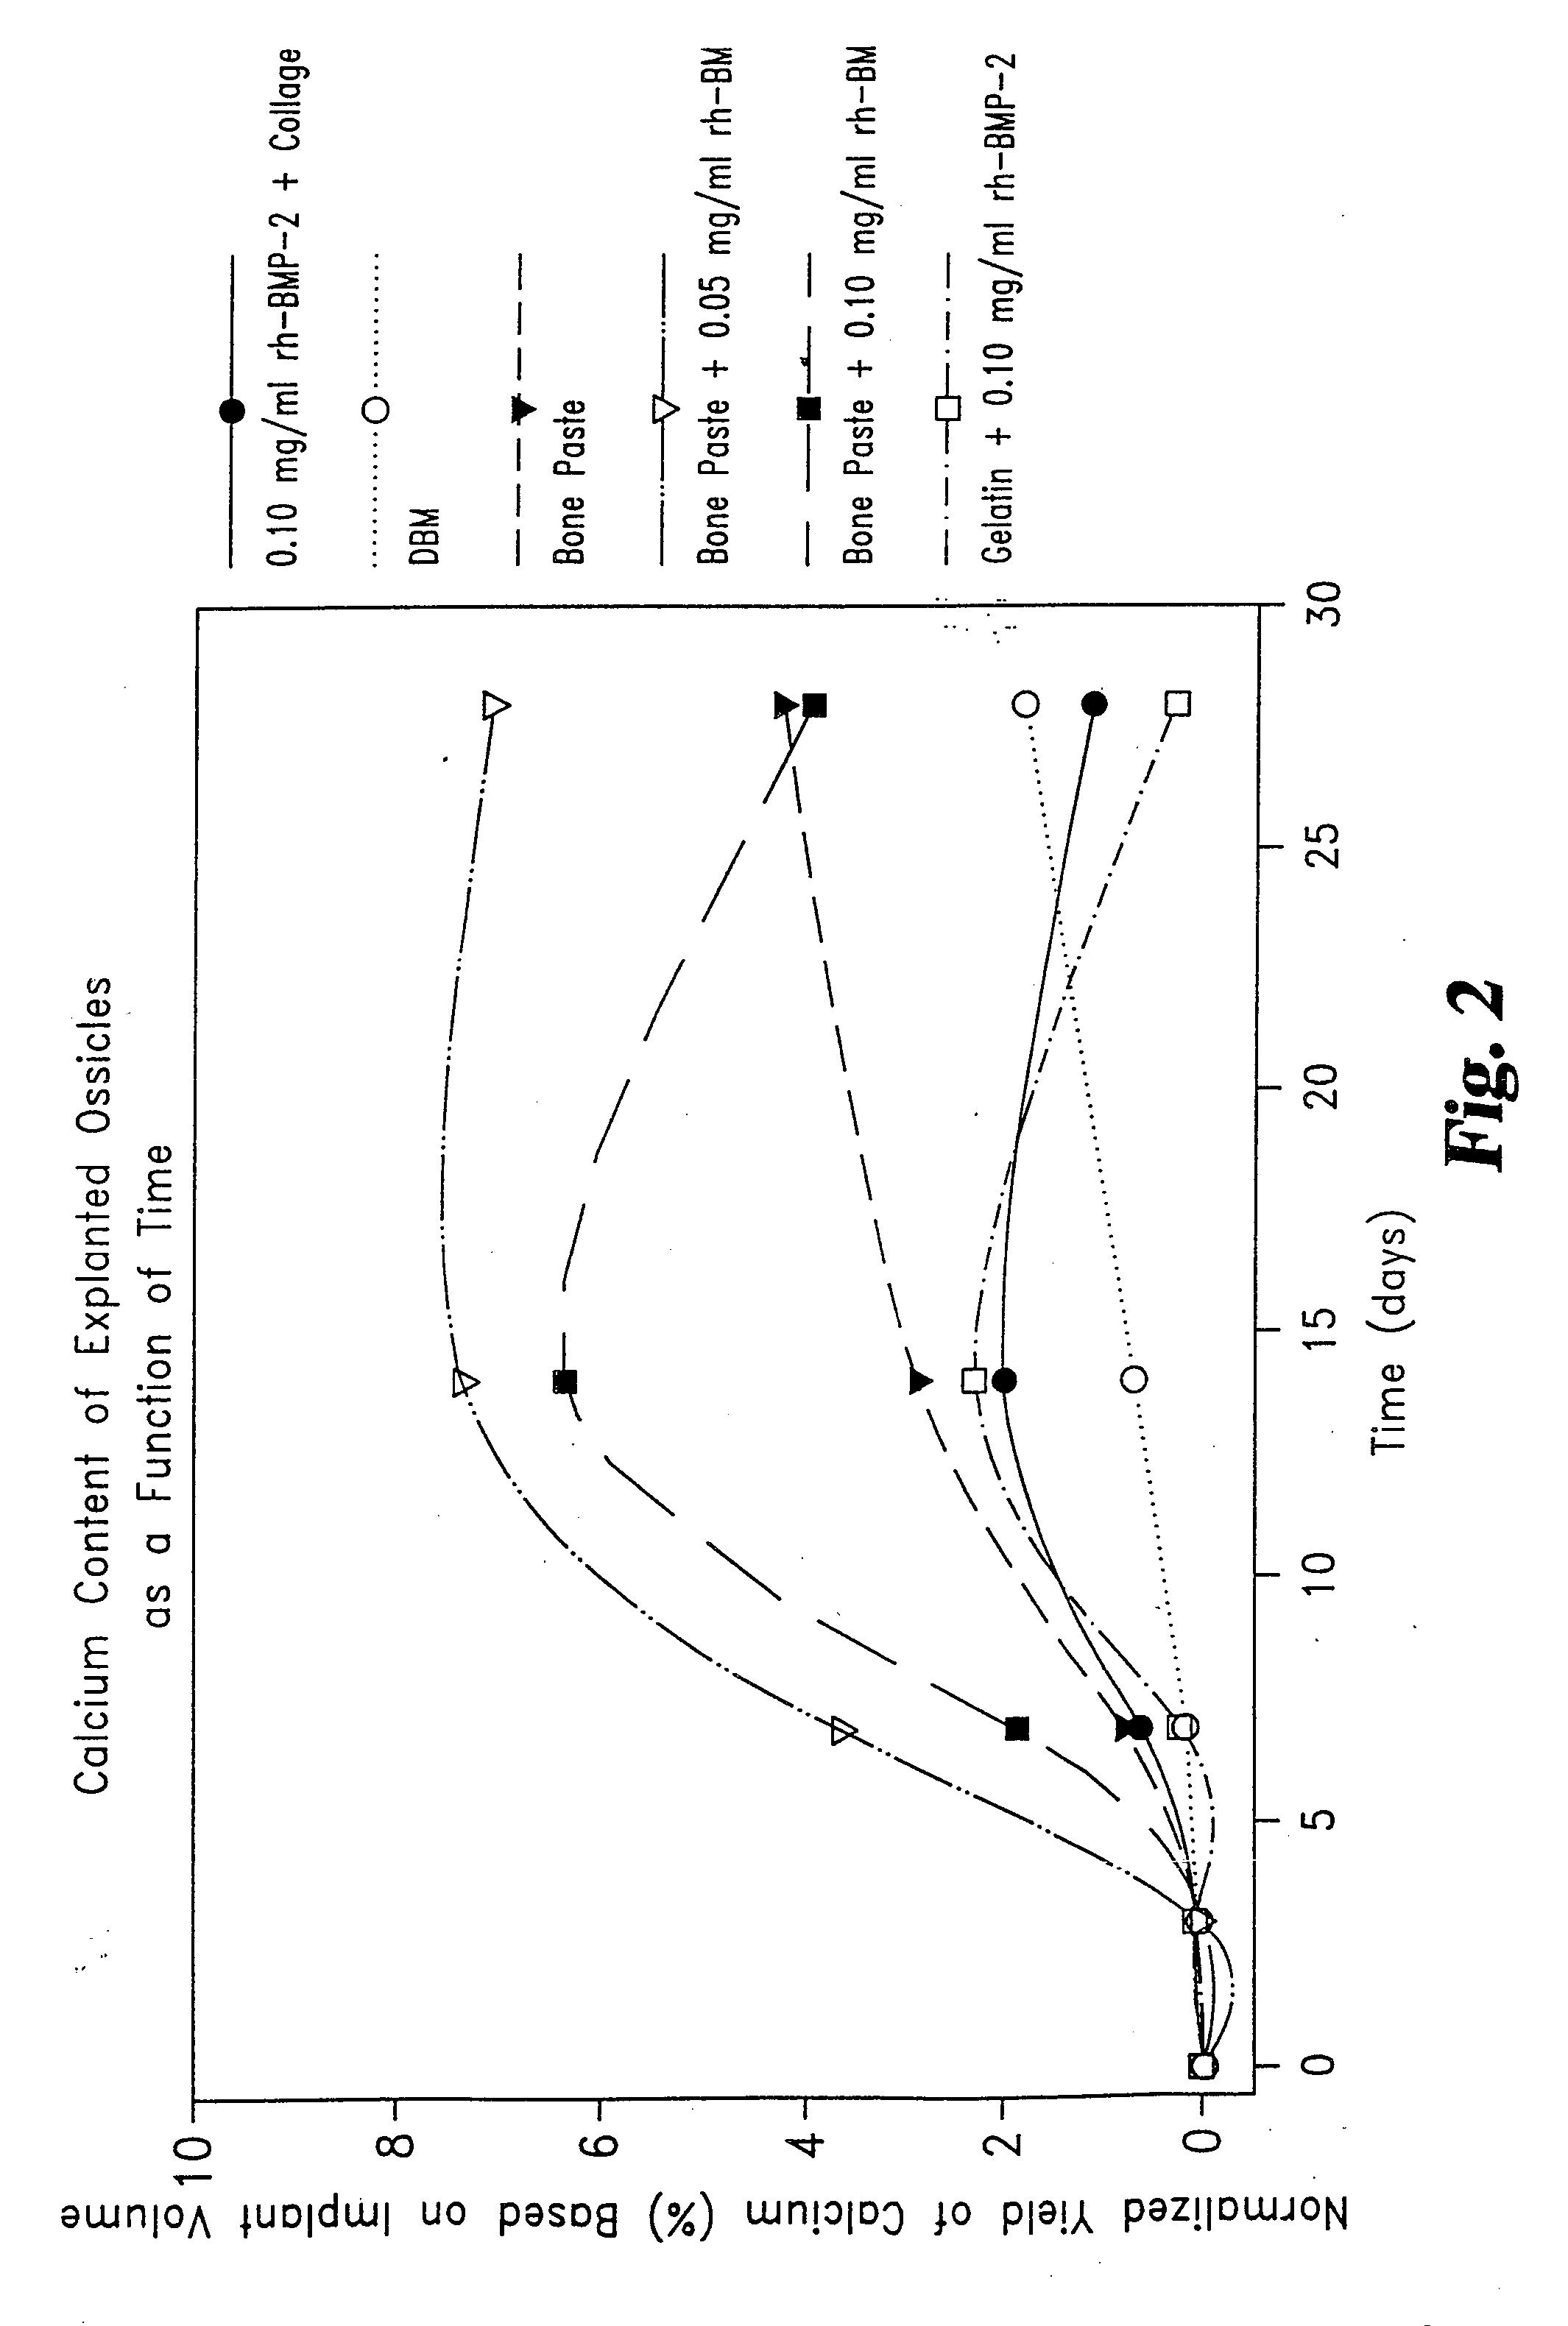 Osteogenic paste compositions and uses thereof